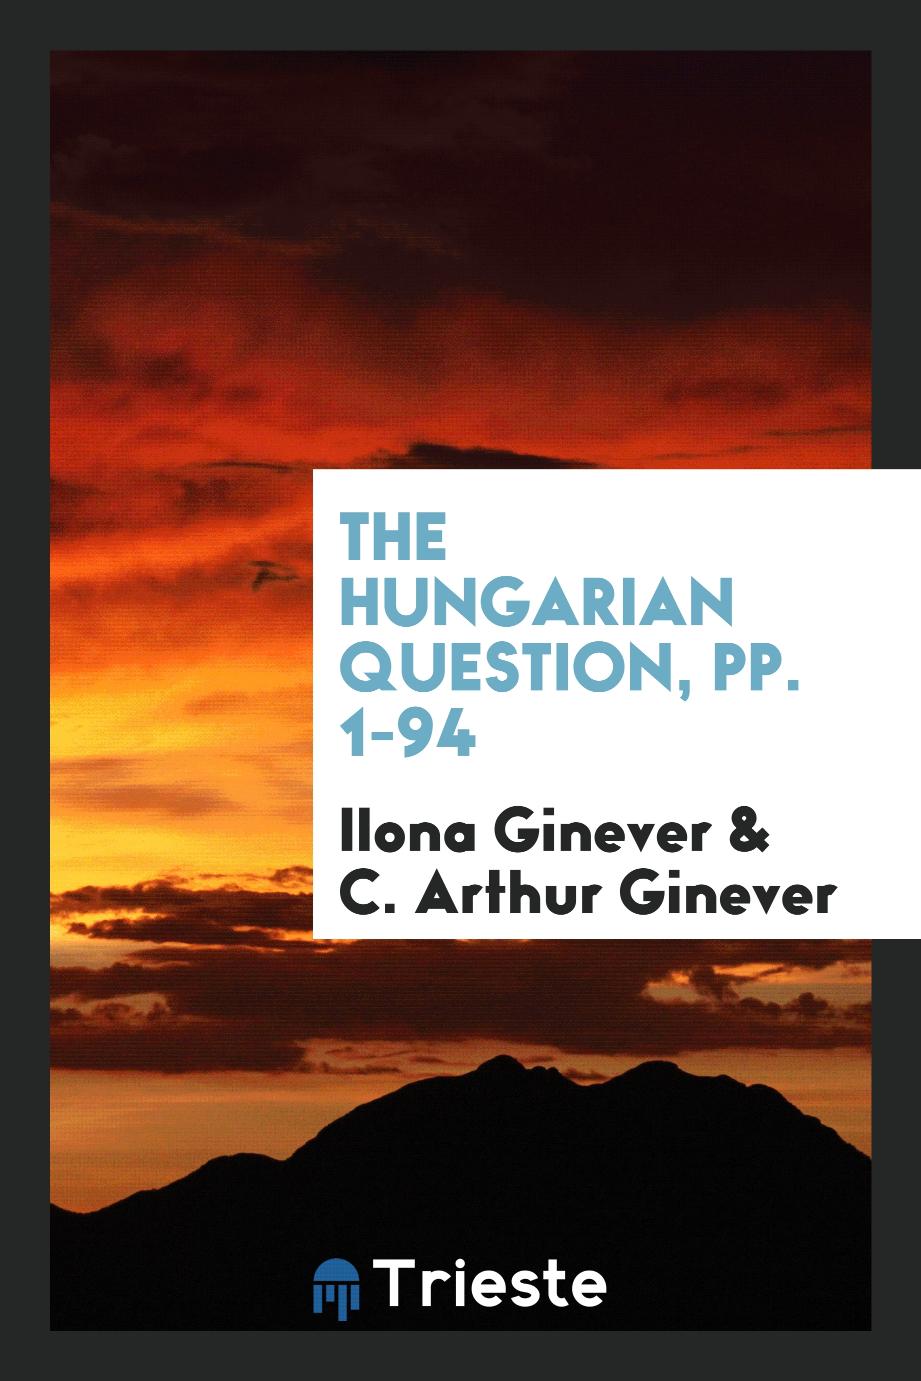 The Hungarian Question, pp. 1-94